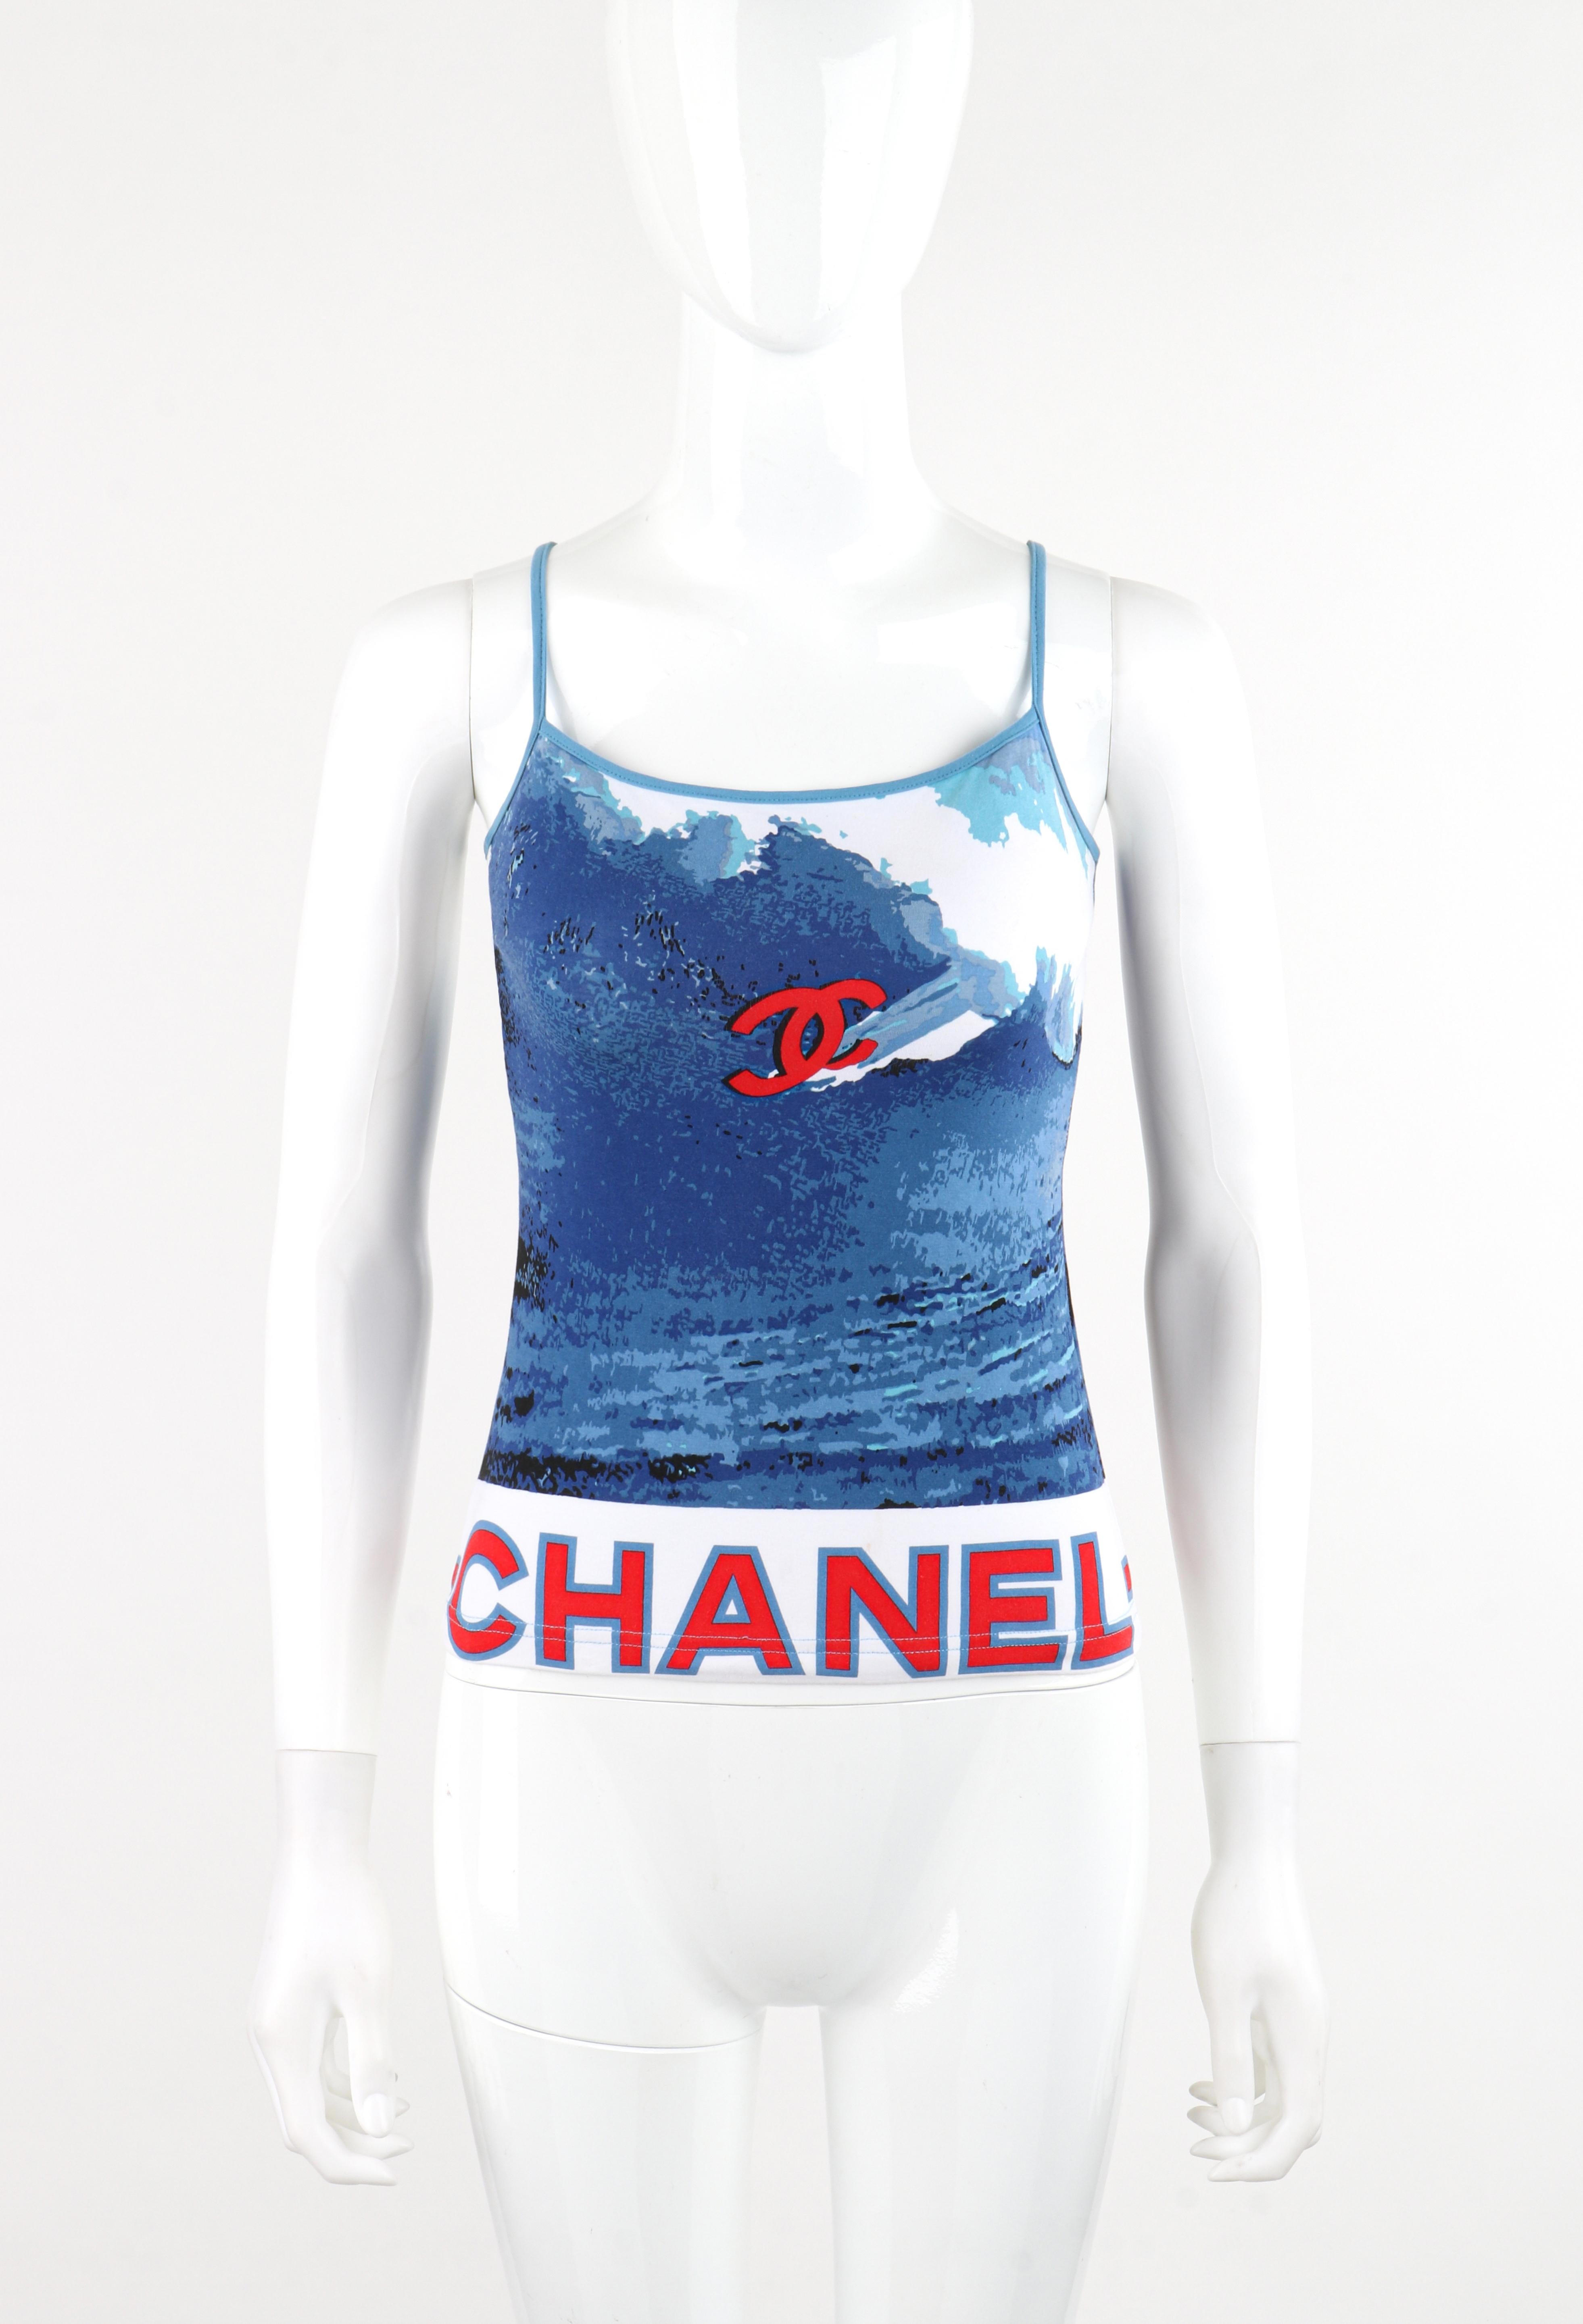 CHANEL 2002 Red White Blue CC Surf Wave Screen Print Stretch Elastic Spaghetti Strap Tank Top

Brand / Manufacturer: Chanel
Collection: The Surf Line 2002
Label(s): Numbered - 02S / P19521V01125 / B2008
Designer: Karl Lagerfeld
Style: Spaghetti